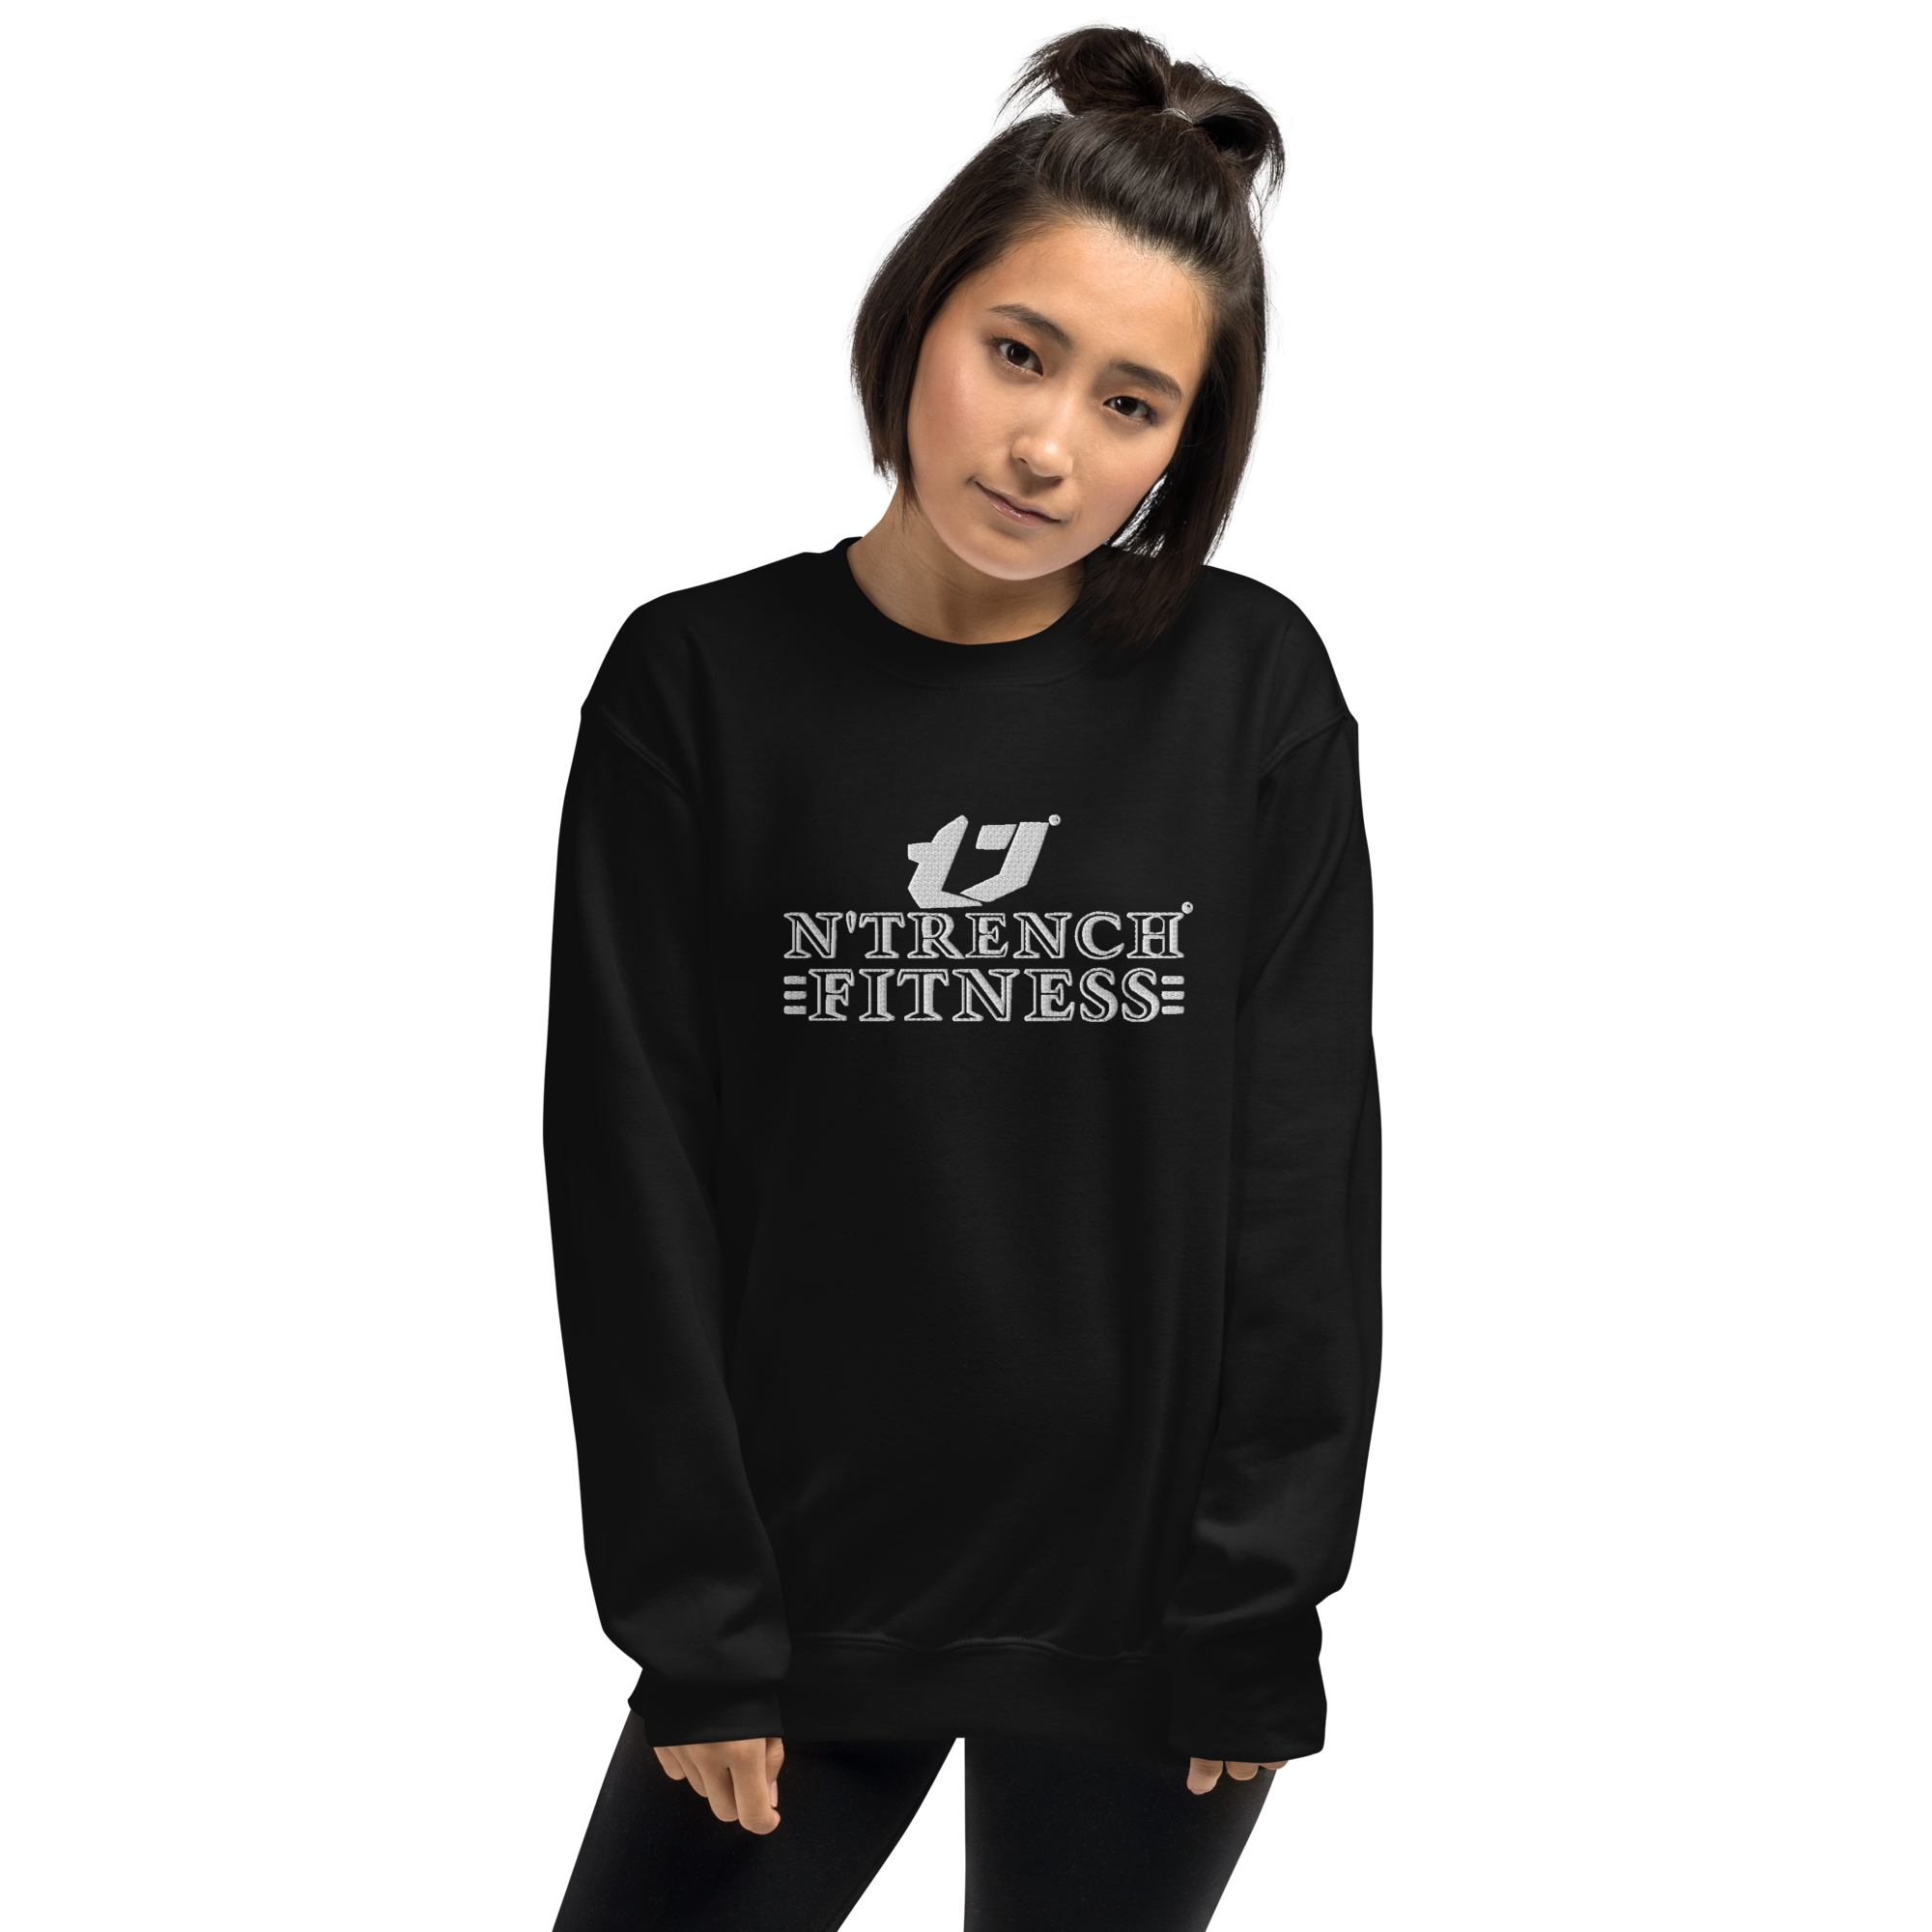 N'Trench Silver Streak Logo and Lettering Unisex Embroidery Sweatshirt